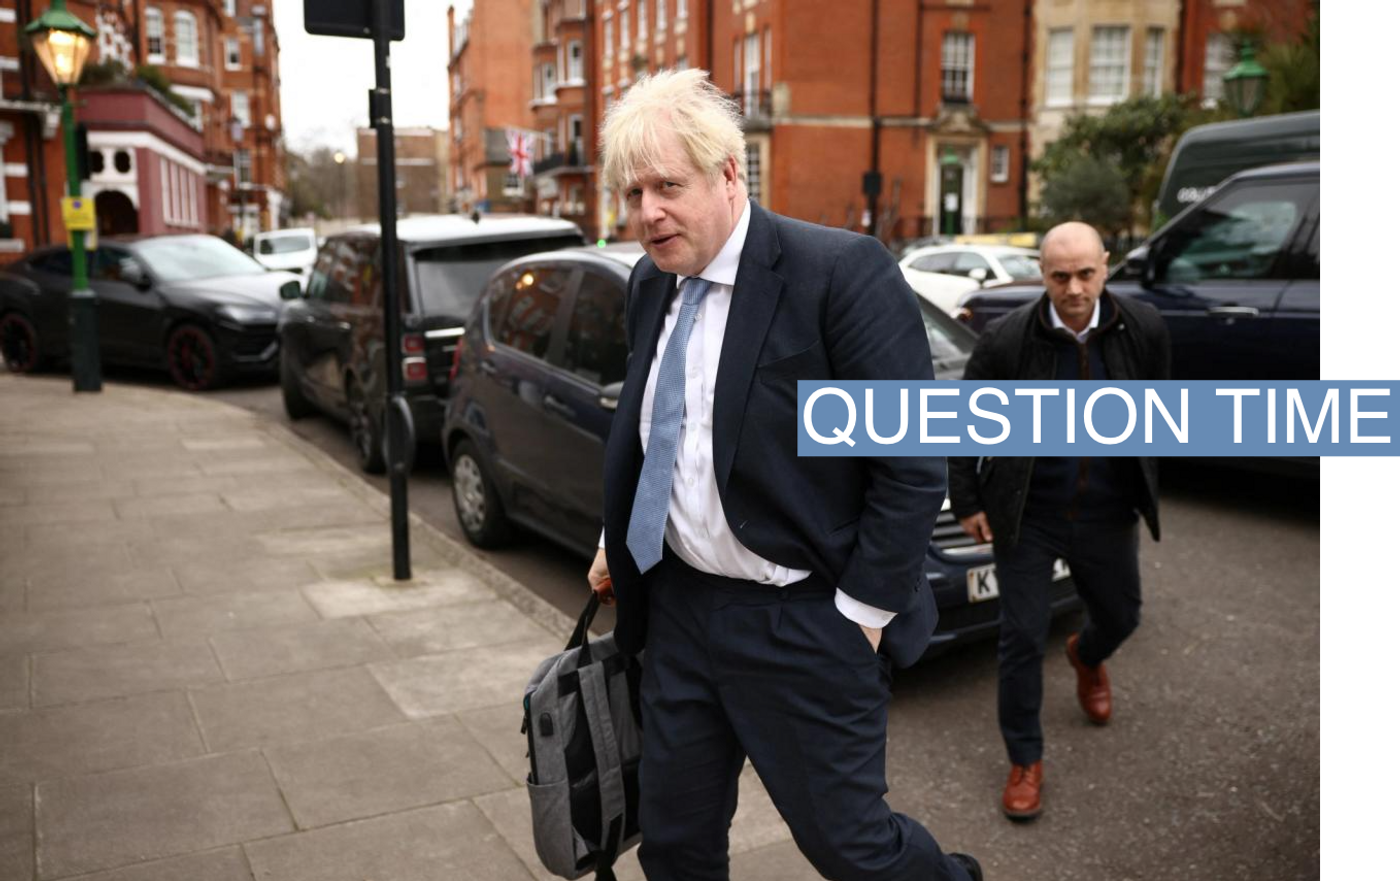 Former British Prime Minister Boris Johnson arrives at a residence in London, Britain, March 3, 2023. REUTERS/Henry Nicholls